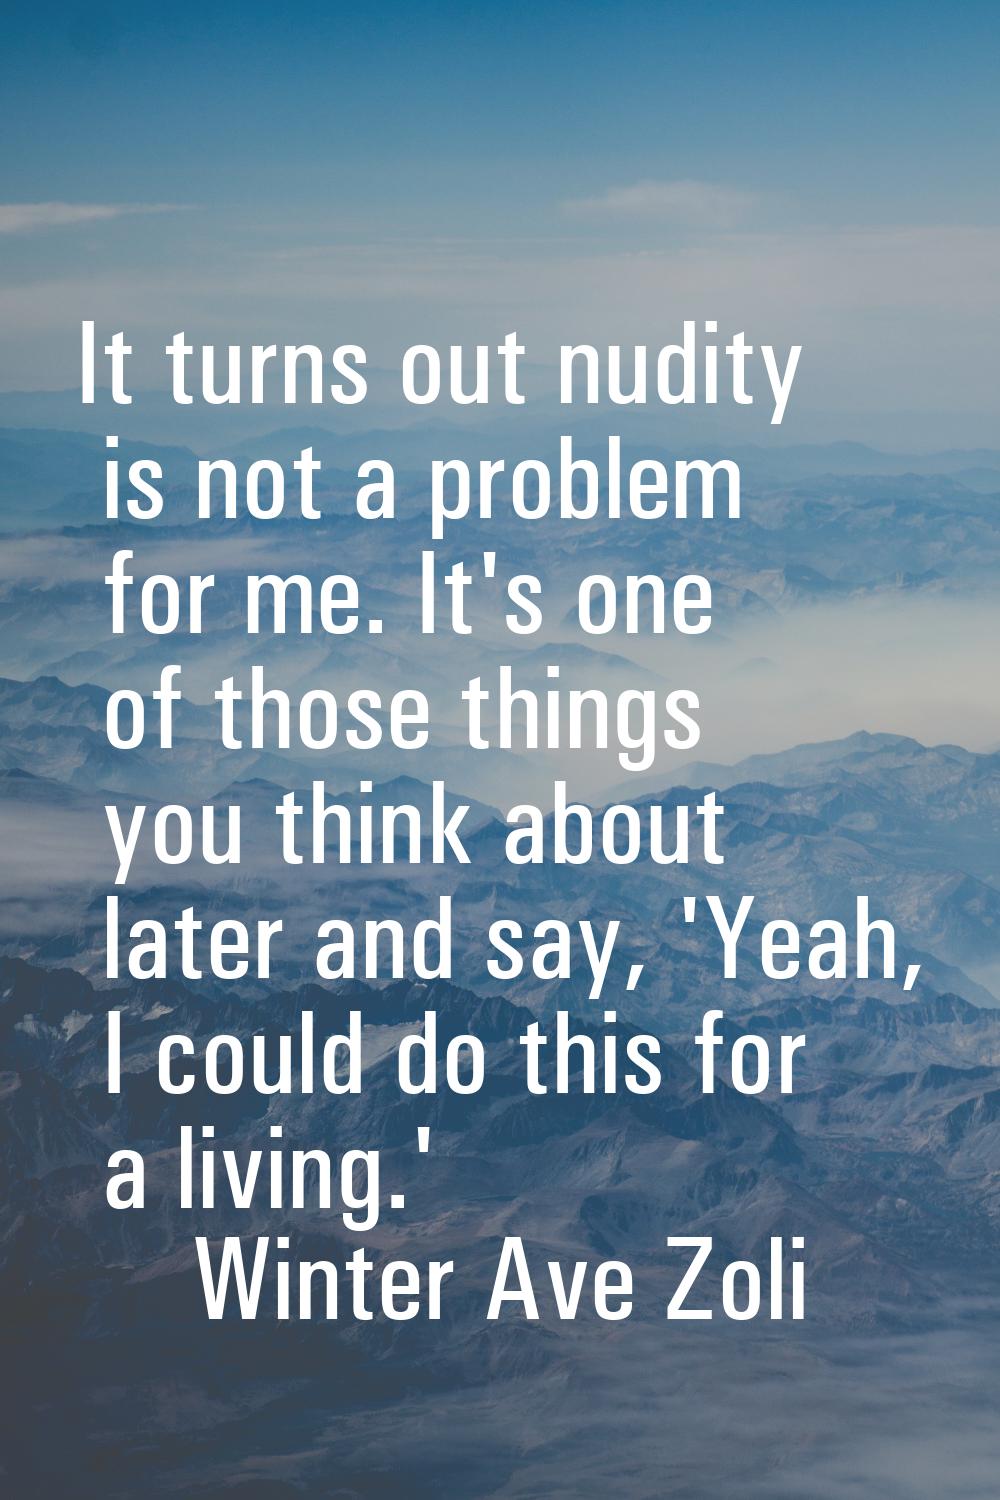 It turns out nudity is not a problem for me. It's one of those things you think about later and say